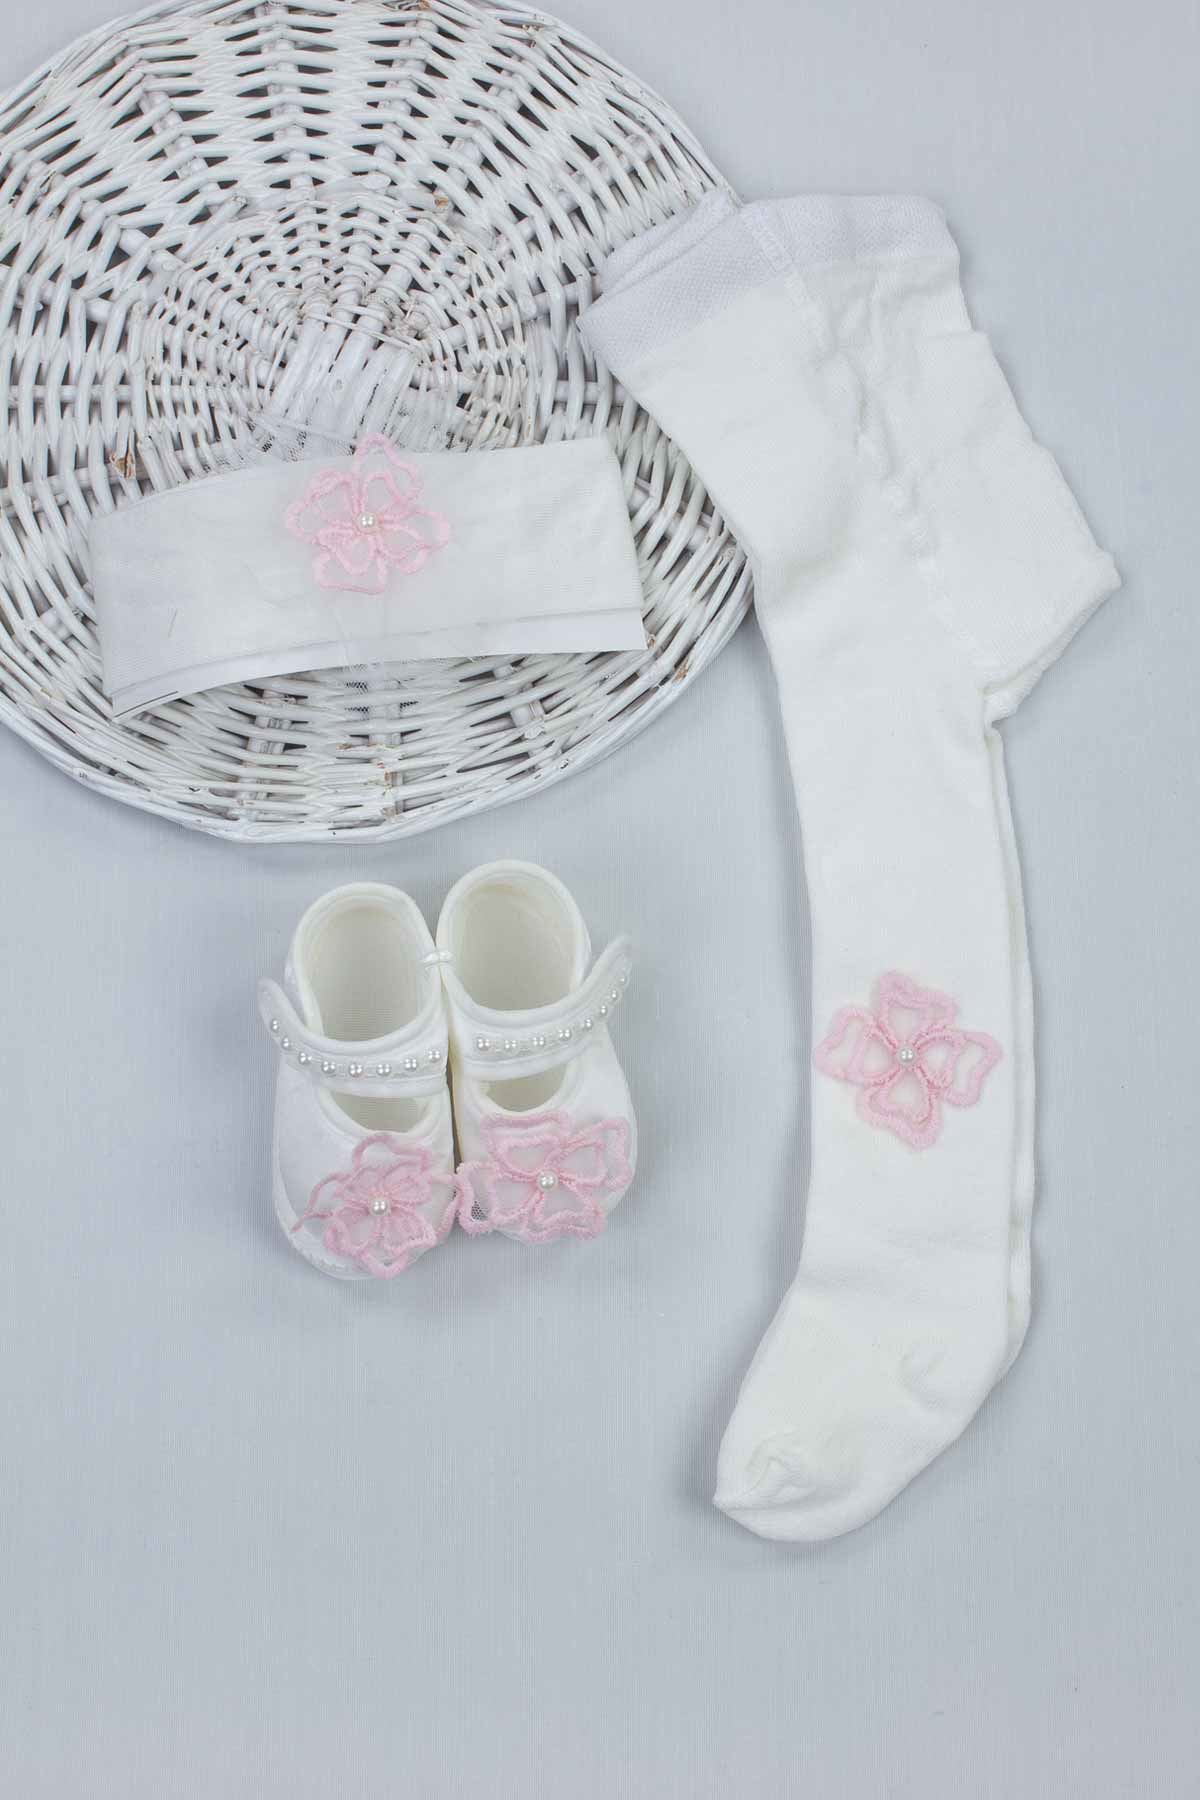 Pink White Baby Girl Newborn Gift Suit Set Girls Babies Tights Stockings Hair Bandana Shoes Fashion Style 2021 Mom Gift package